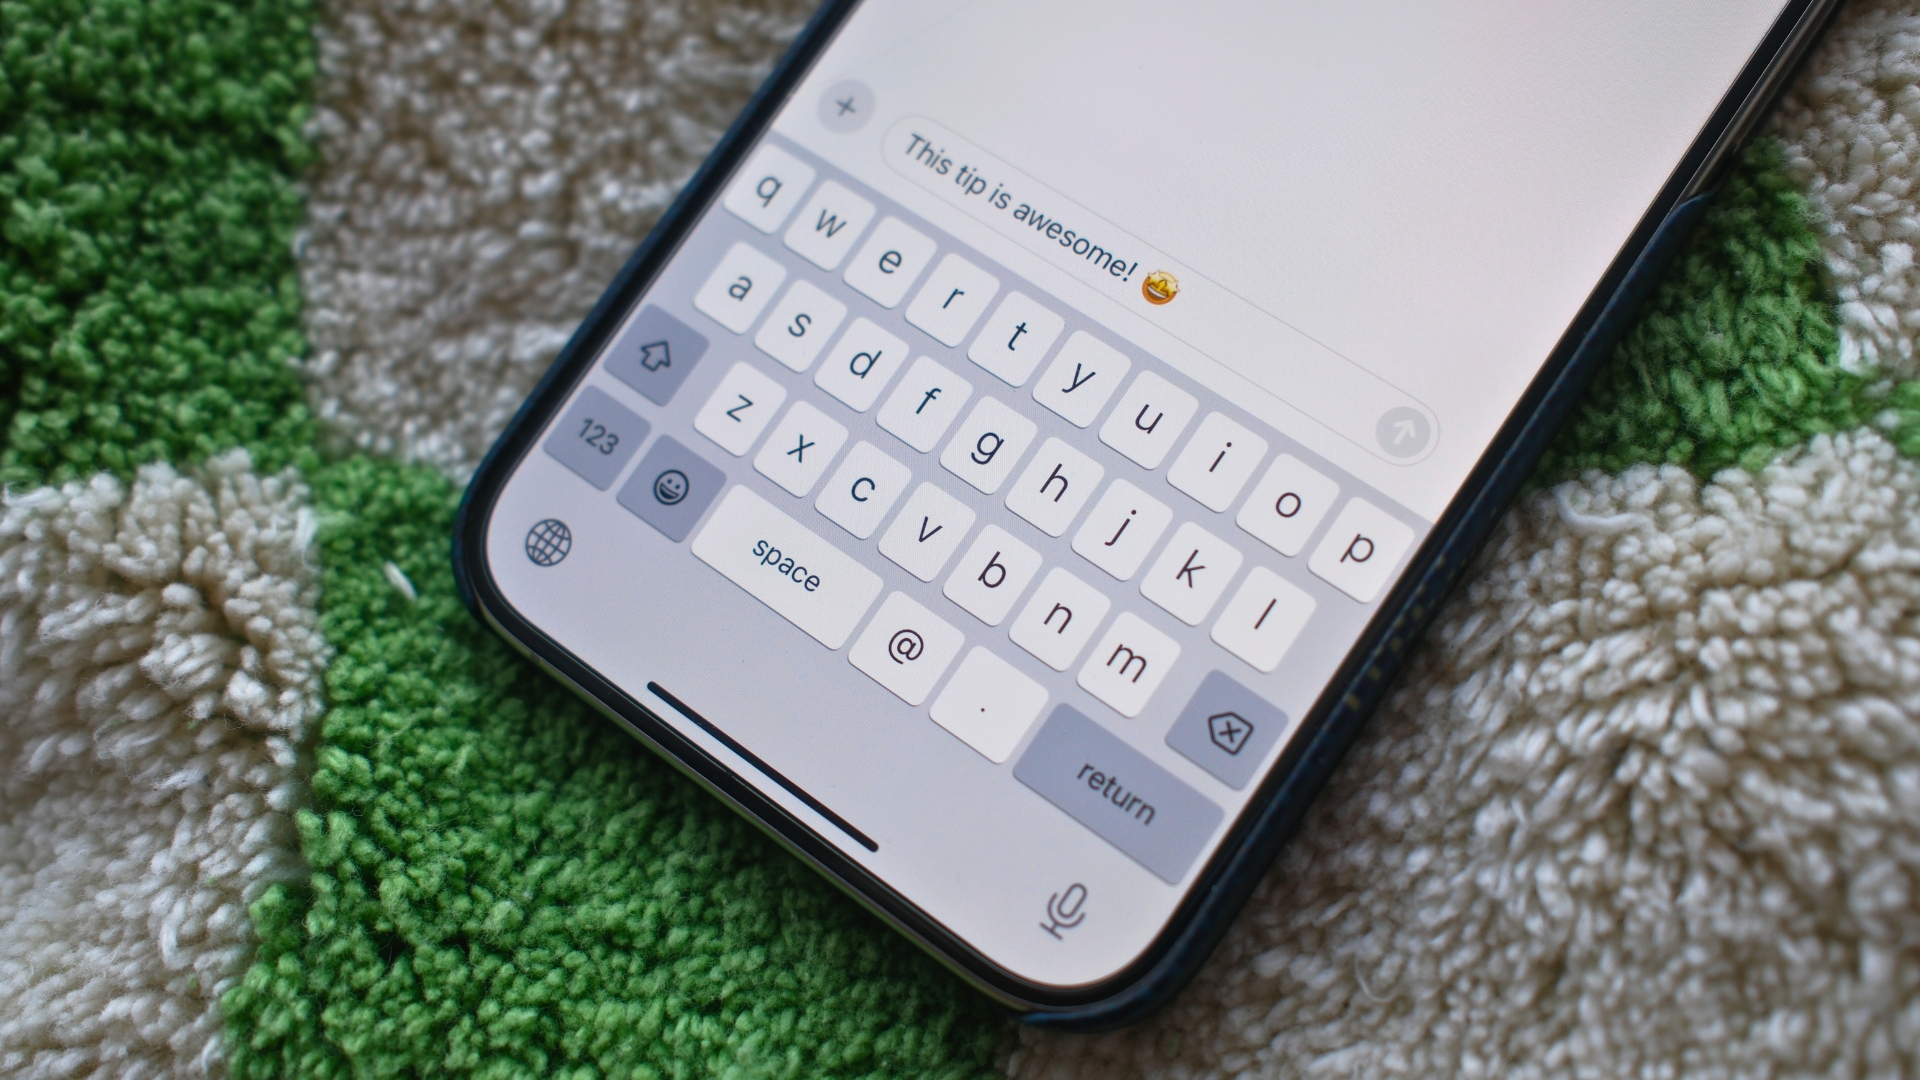 Speed up your iPhone keyboard typing with this little-known technique everyone should master